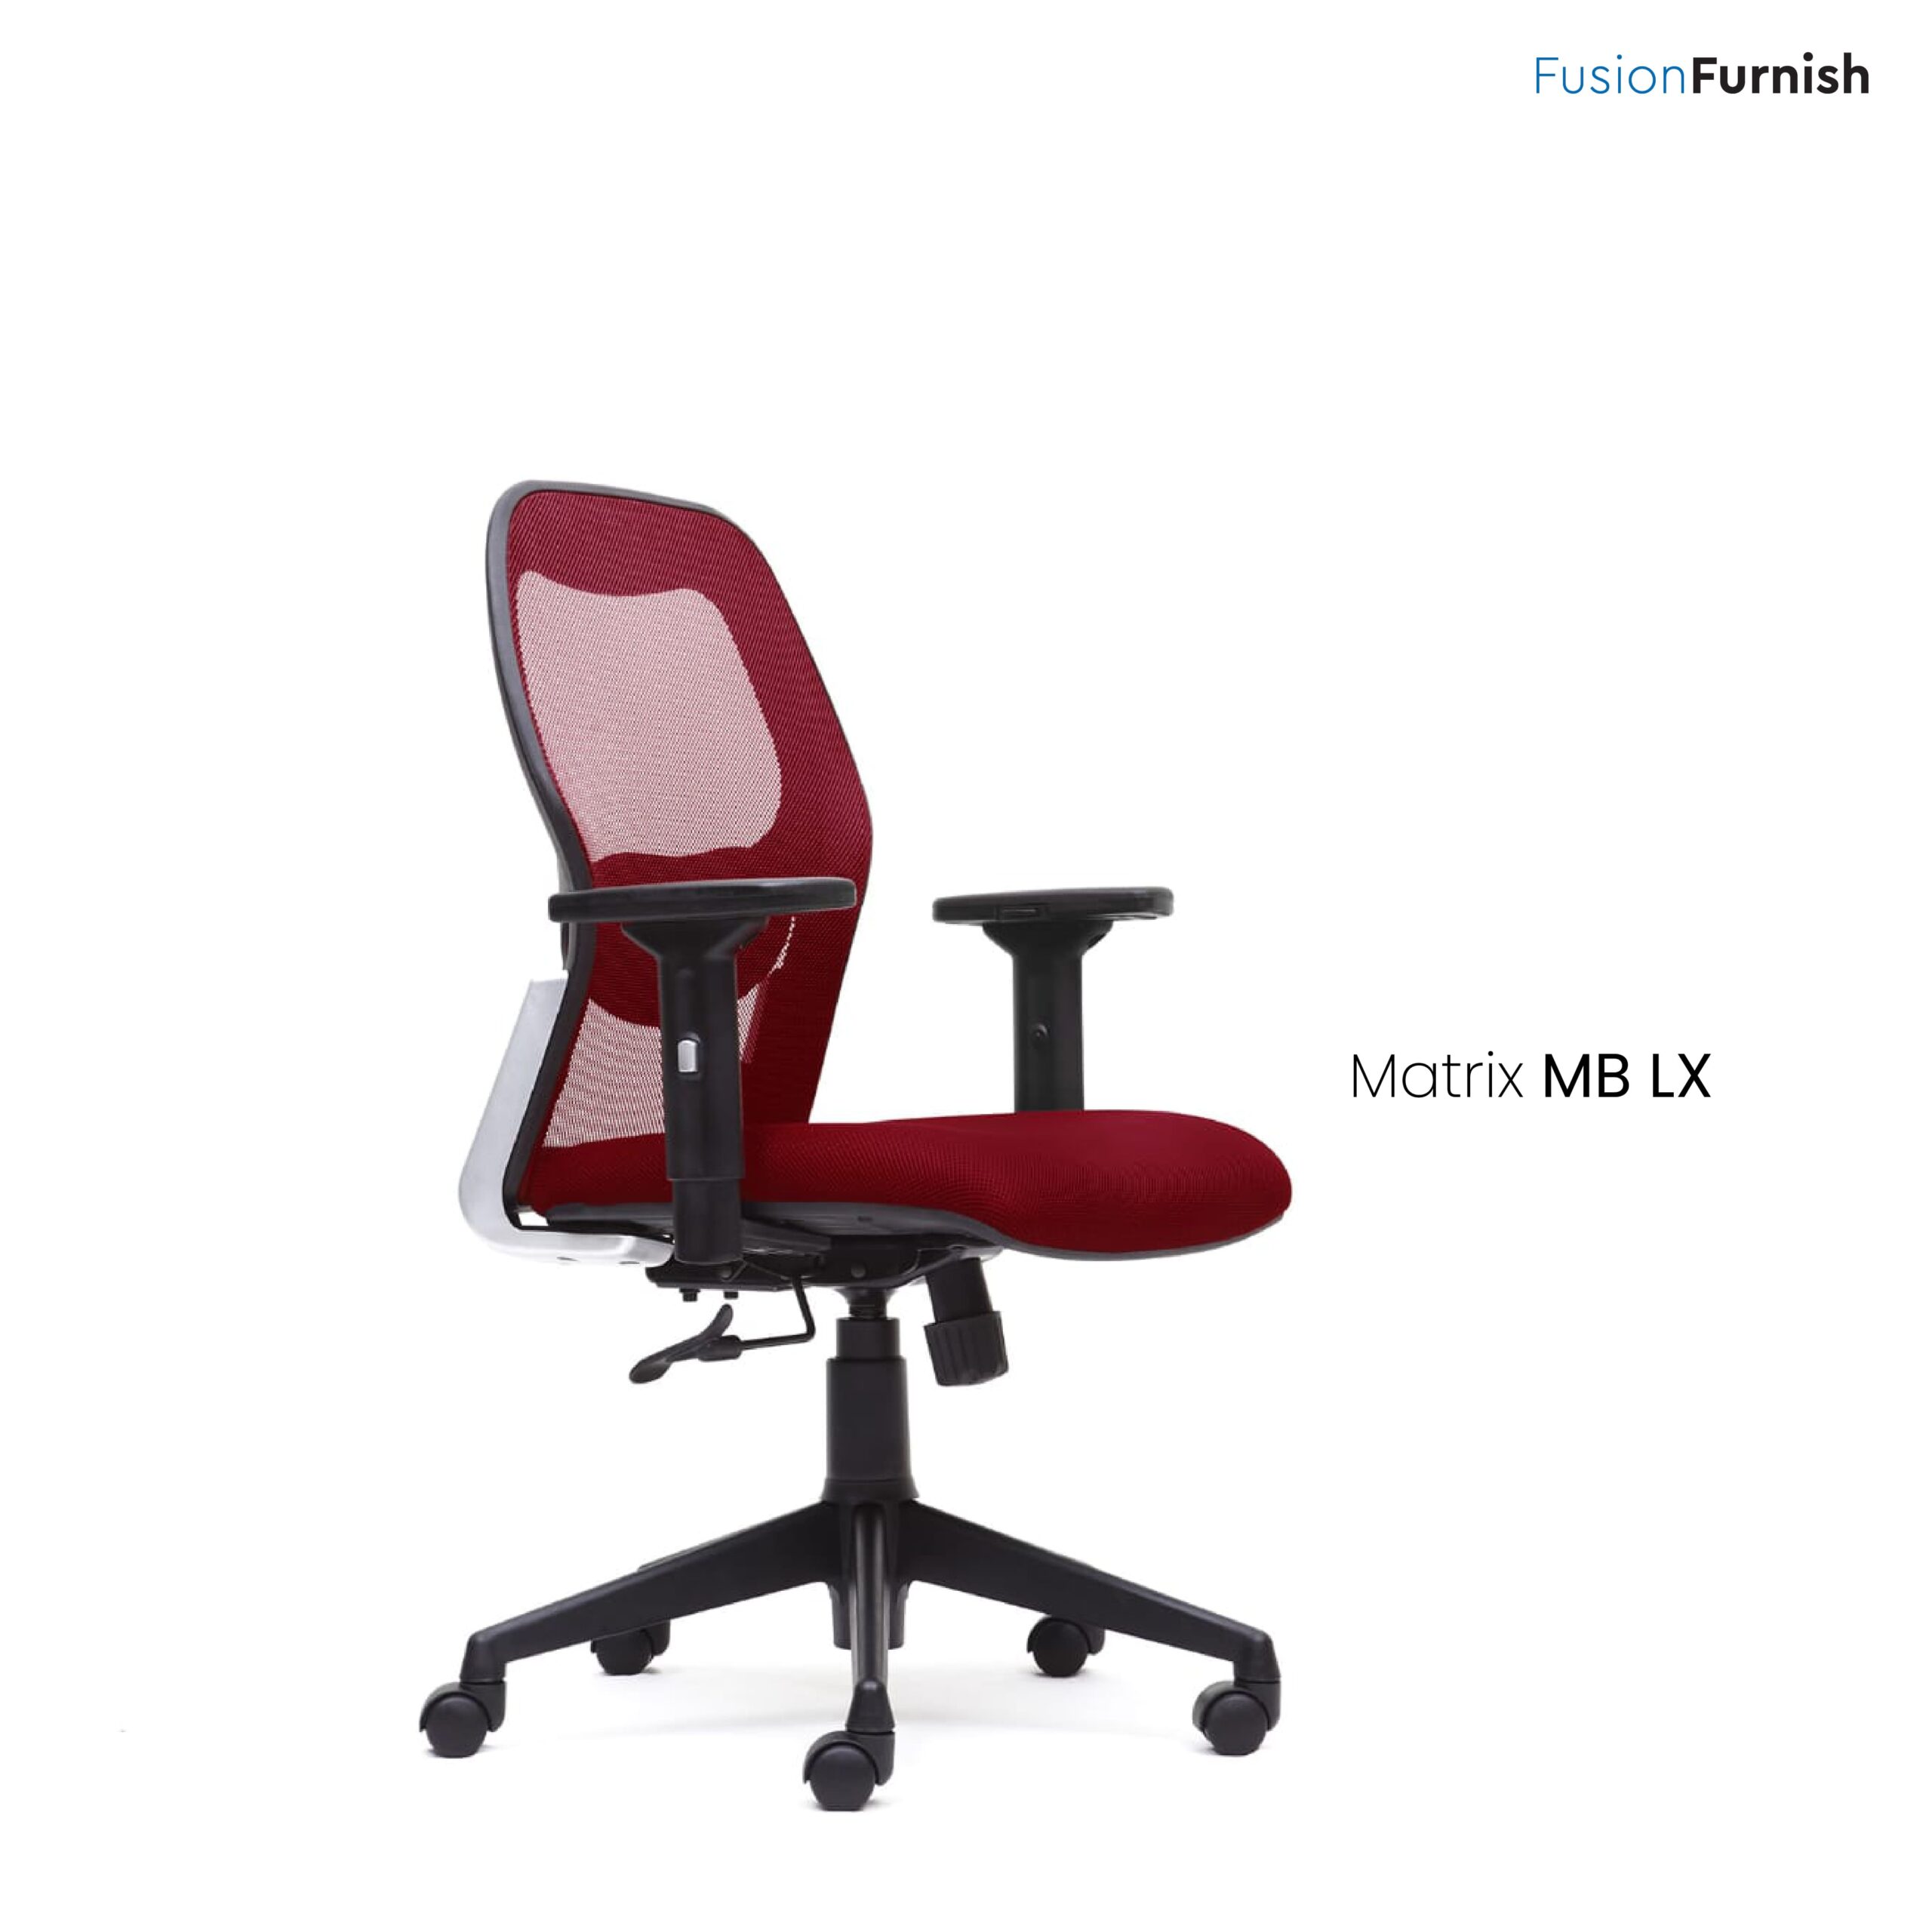 MATRIX MB LXChoose the right chair for your longer working hours – Matrix office chairs ensure your back is in good health while keeping your feet well-grounded!